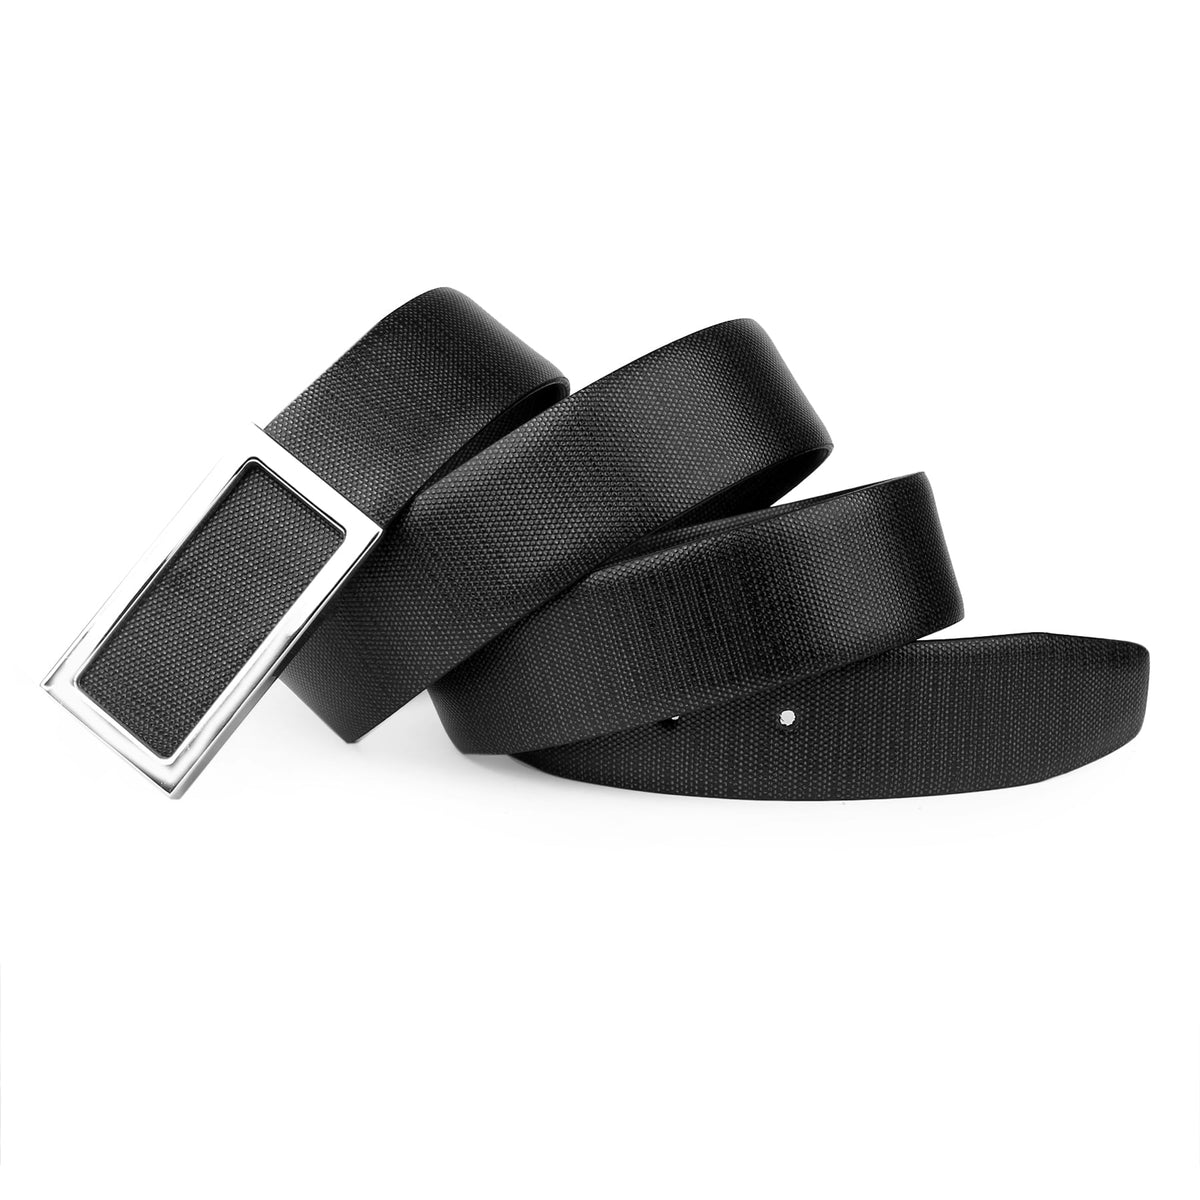 Belwaba Genuine Leather Black Mens Belt With Black Coated Finished Buckle (40) (Black) At Nykaa, Best Beauty Products Online